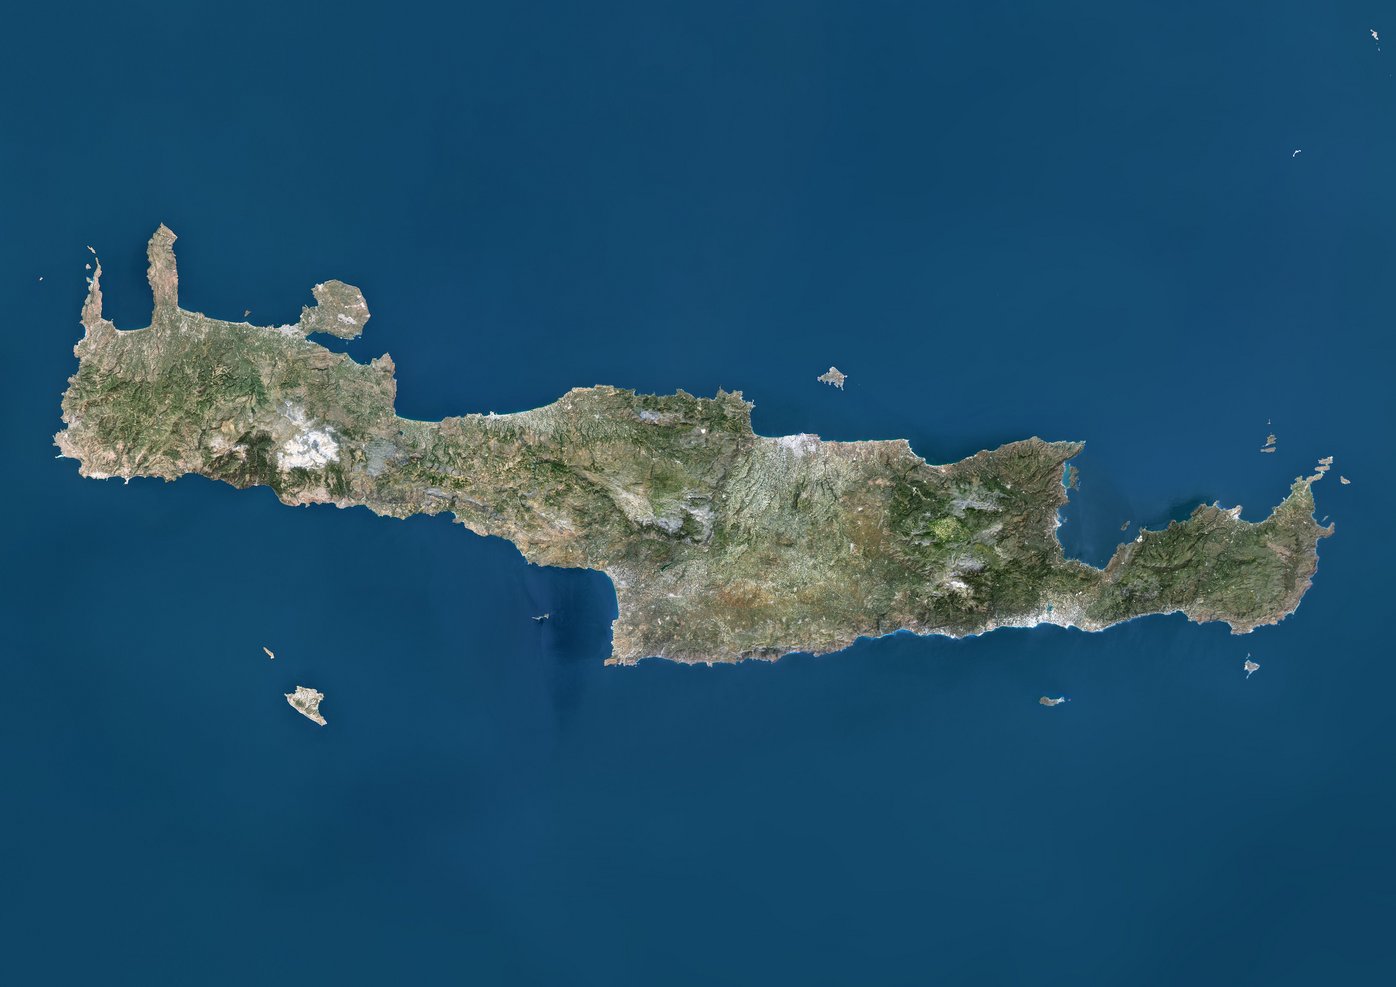 GER0PP Satellite view of Crete, Greece. Crete is the largest and most populous of the Greek islands. This image was compiled from data acquired by Landsat 8 satellite in 2014.